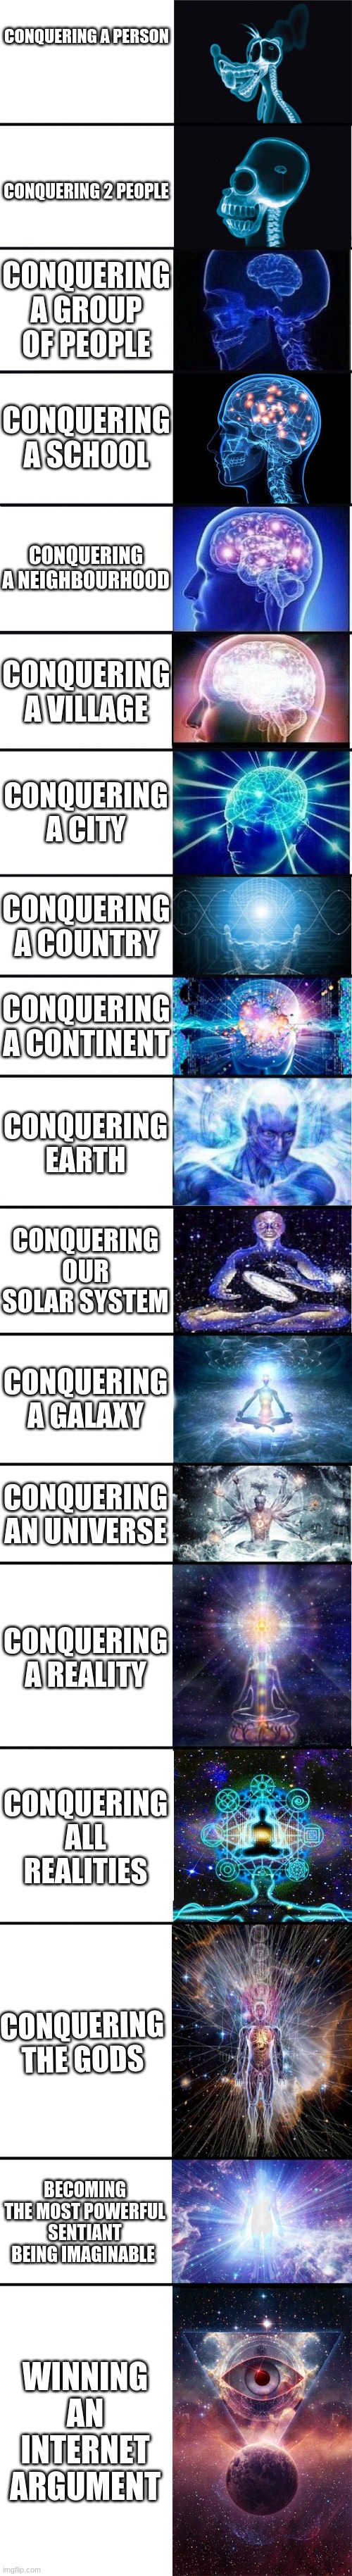 We all know its true | CONQUERING A PERSON; CONQUERING 2 PEOPLE; CONQUERING A GROUP OF PEOPLE; CONQUERING A SCHOOL; CONQUERING A NEIGHBOURHOOD; CONQUERING A VILLAGE; CONQUERING A CITY; CONQUERING A COUNTRY; CONQUERING A CONTINENT; CONQUERING EARTH; CONQUERING OUR SOLAR SYSTEM; CONQUERING A GALAXY; CONQUERING AN UNIVERSE; CONQUERING A REALITY; CONQUERING ALL REALITIES; CONQUERING THE GODS; BECOMING THE MOST POWERFUL SENTIANT BEING IMAGINABLE; WINNING AN INTERNET ARGUMENT | image tagged in expanding brain 9001 | made w/ Imgflip meme maker